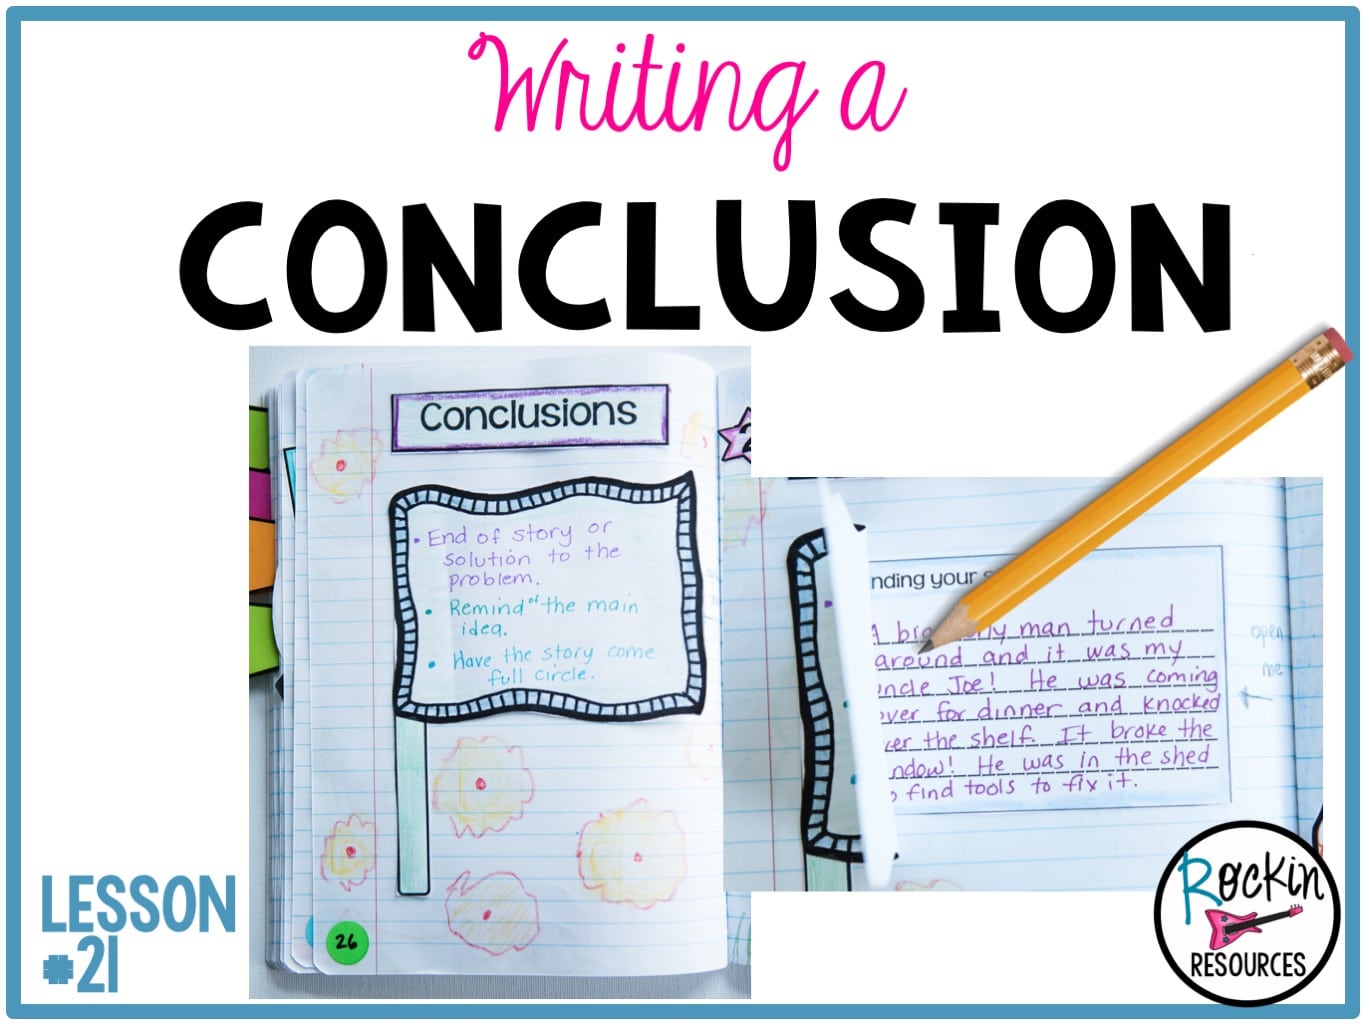 Writing Mini Lesson #27- Writing the Conclusion of a Narrative